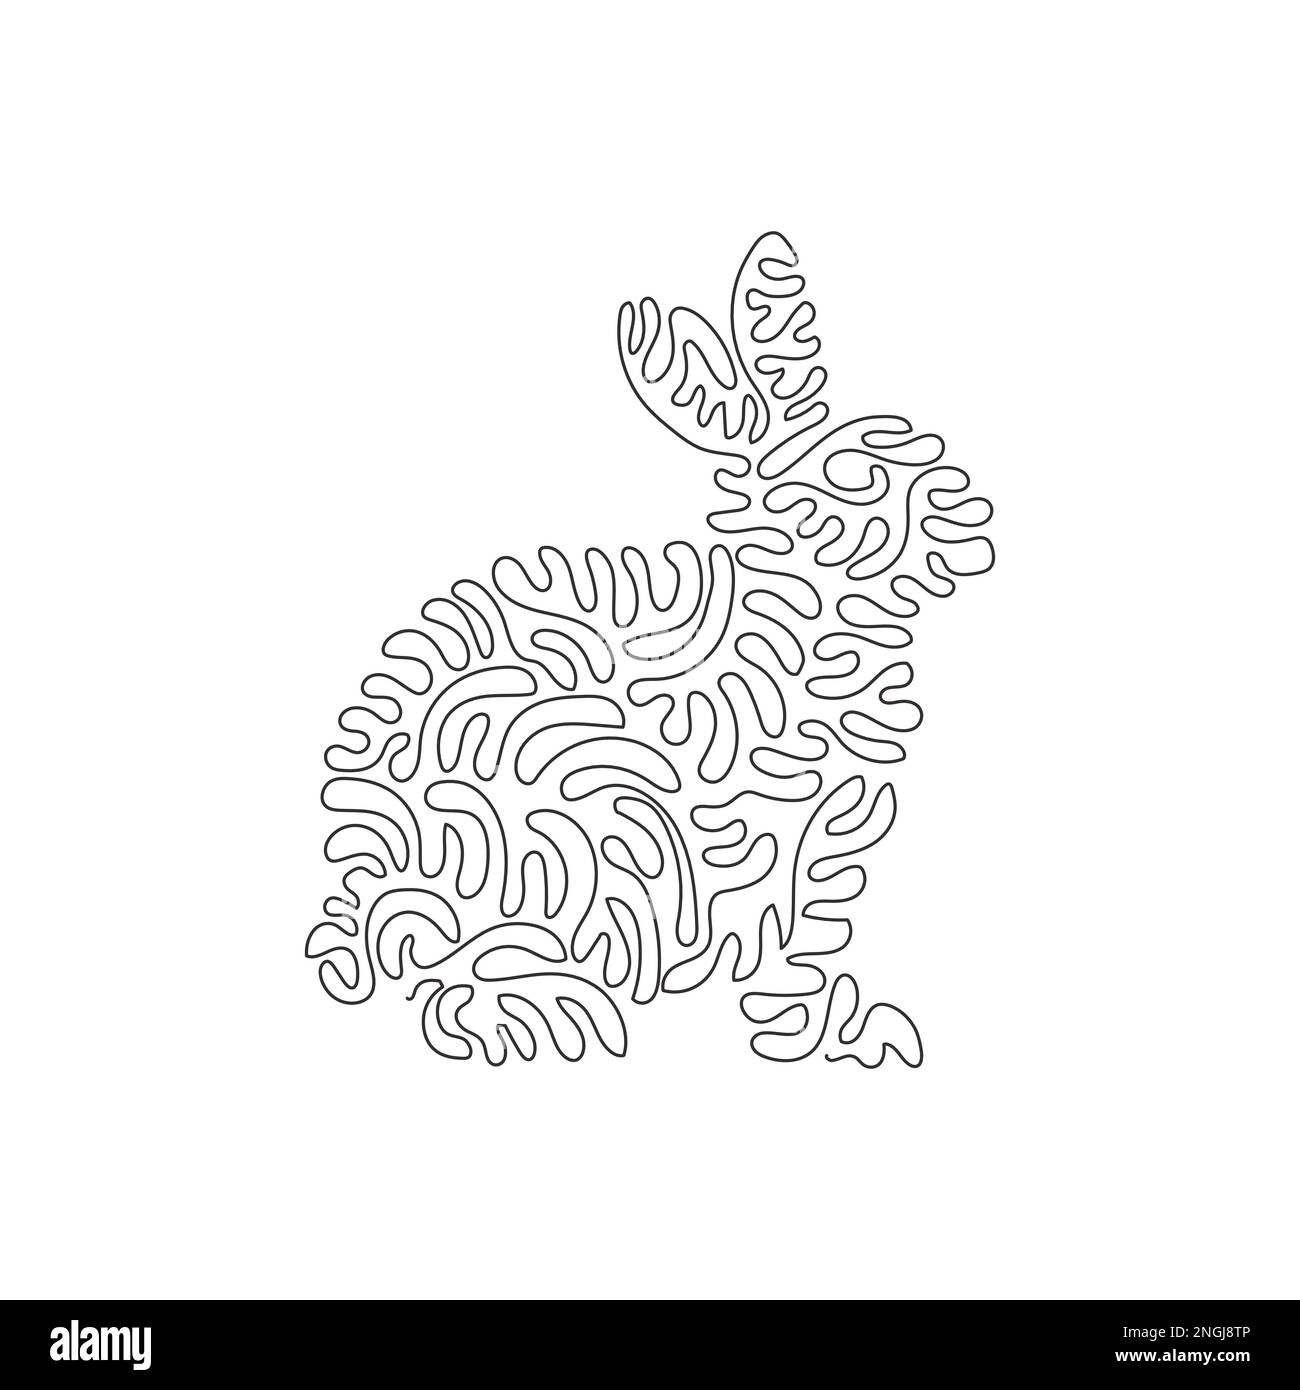 Continuous curve one line drawing of cute sitting rabbit abstract art. Single line editable stroke vector illustration of agile rabbit for logo Stock Vector